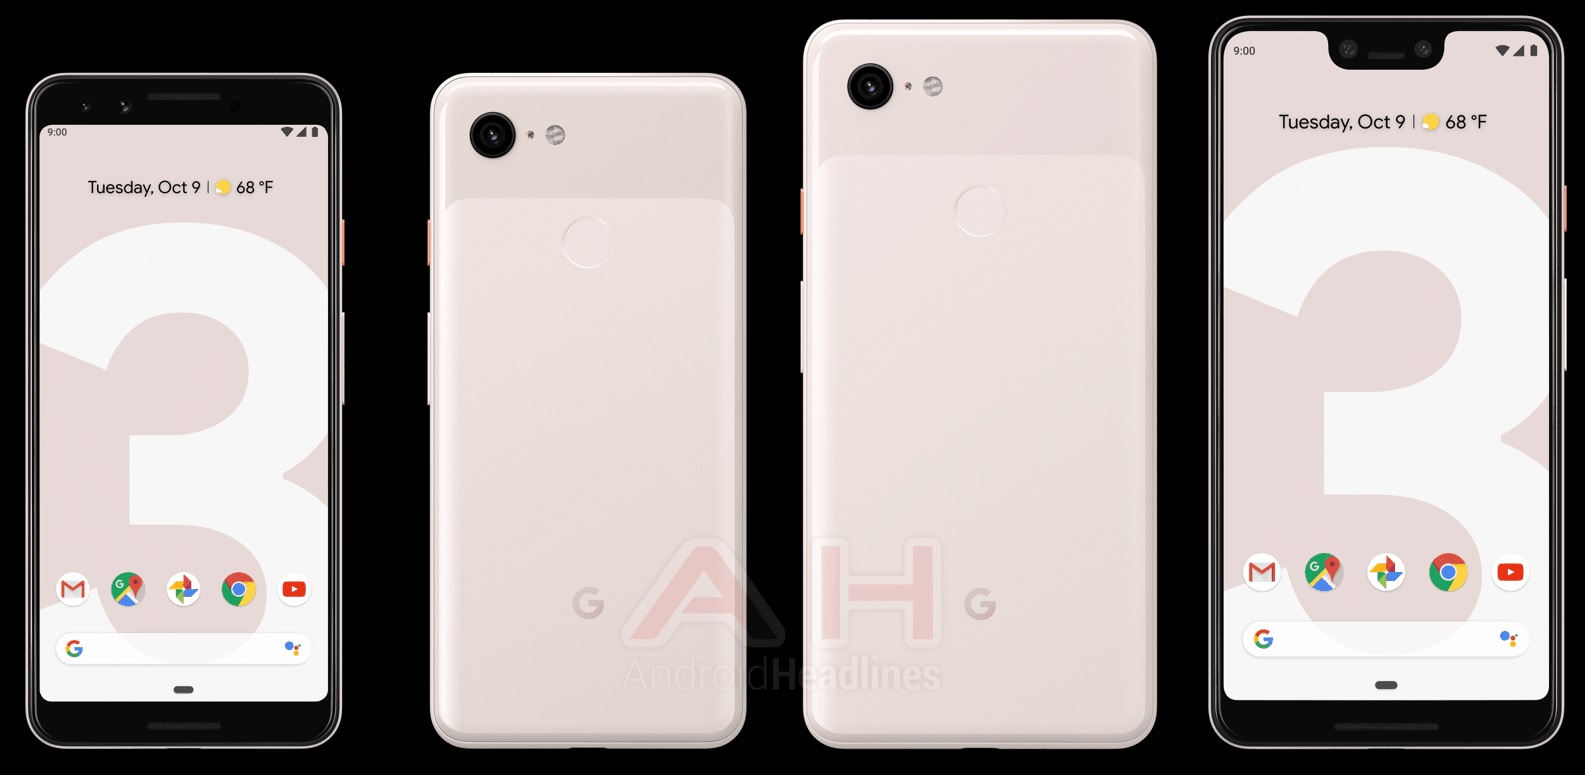 Leaked images of the Google Pixel 3 pink color option.